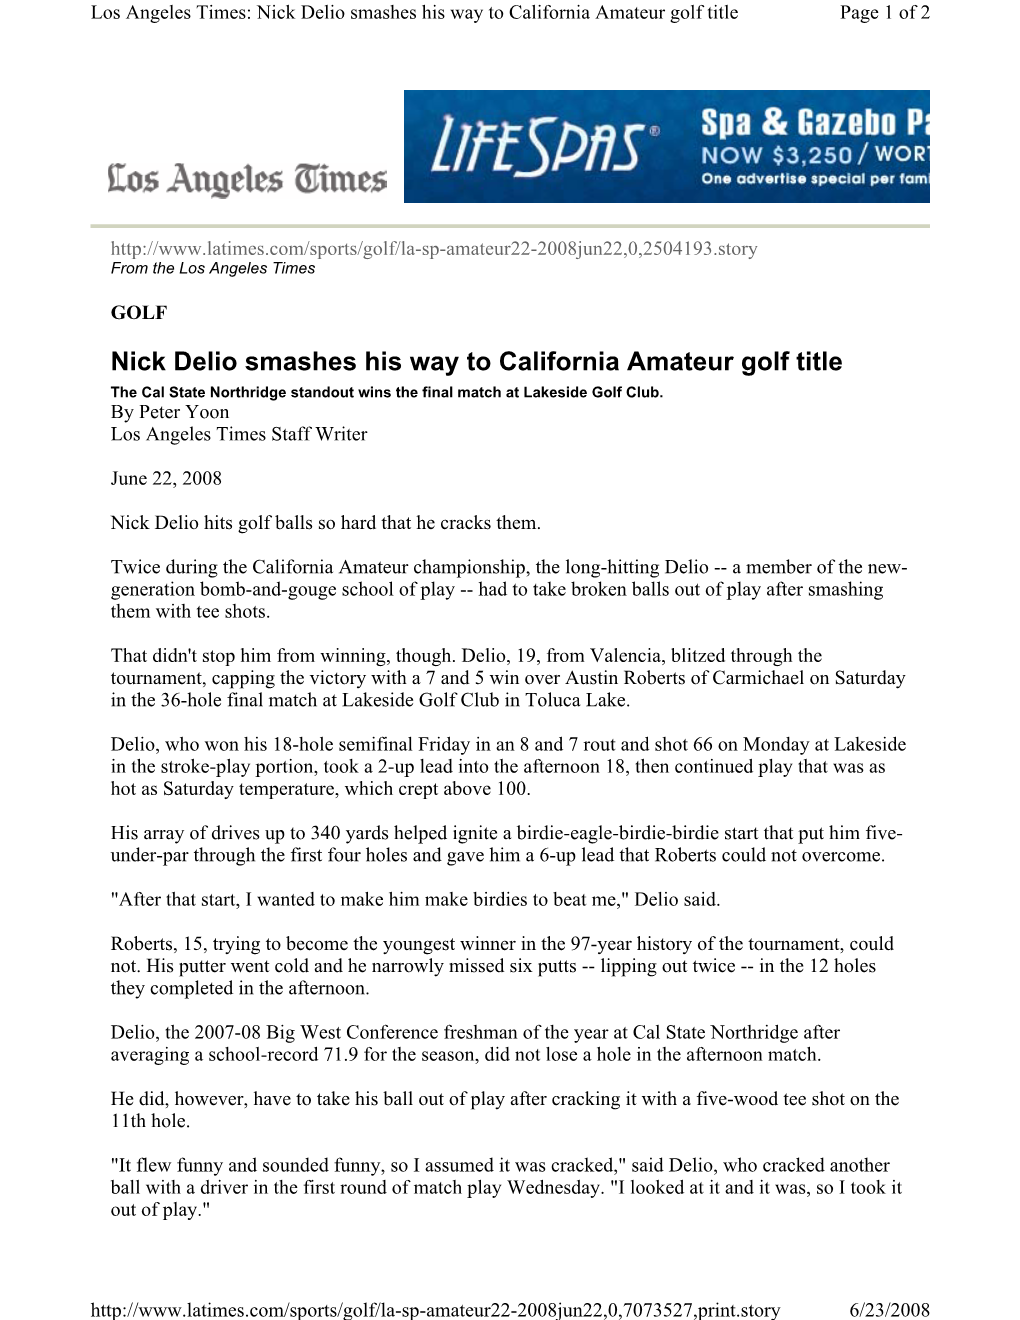 Nick Delio Smashes His Way to California Amateur Golf Title Page 1 of 2